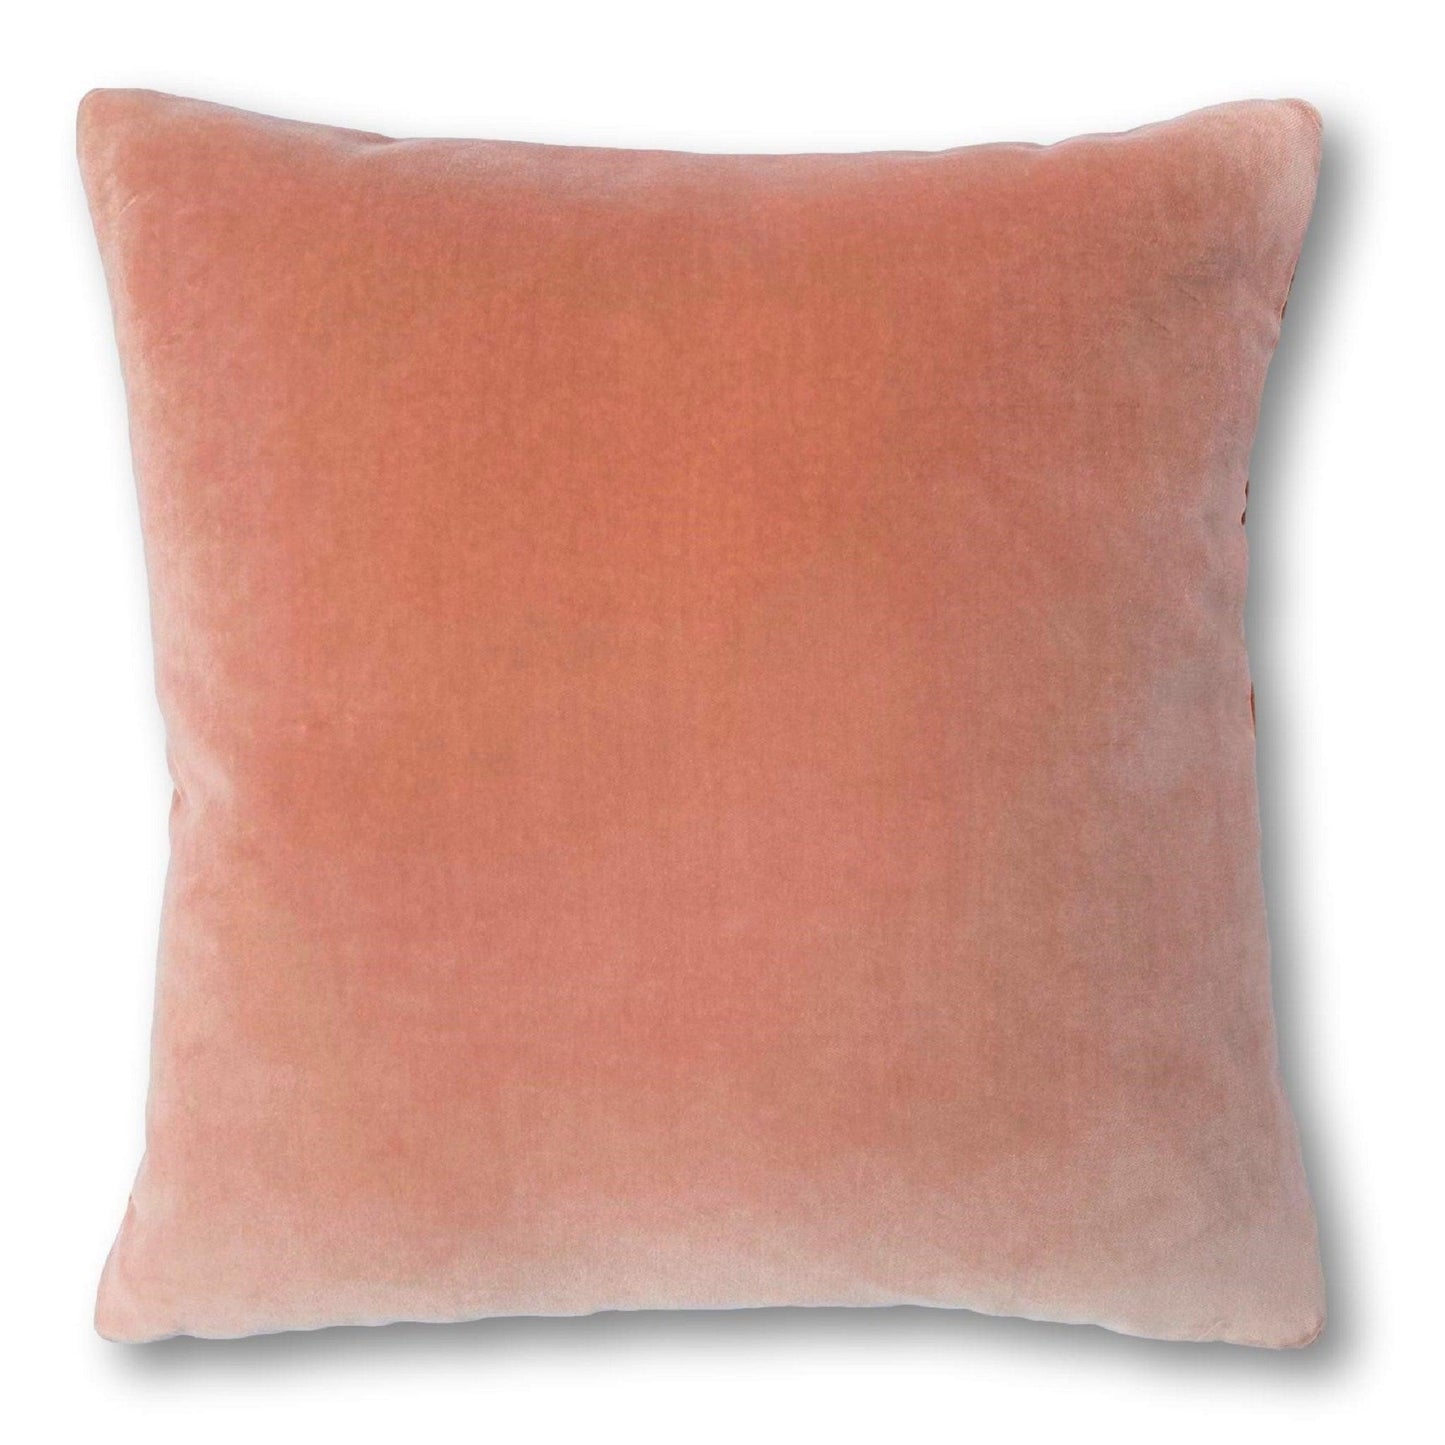 cushion covers online in blush pink